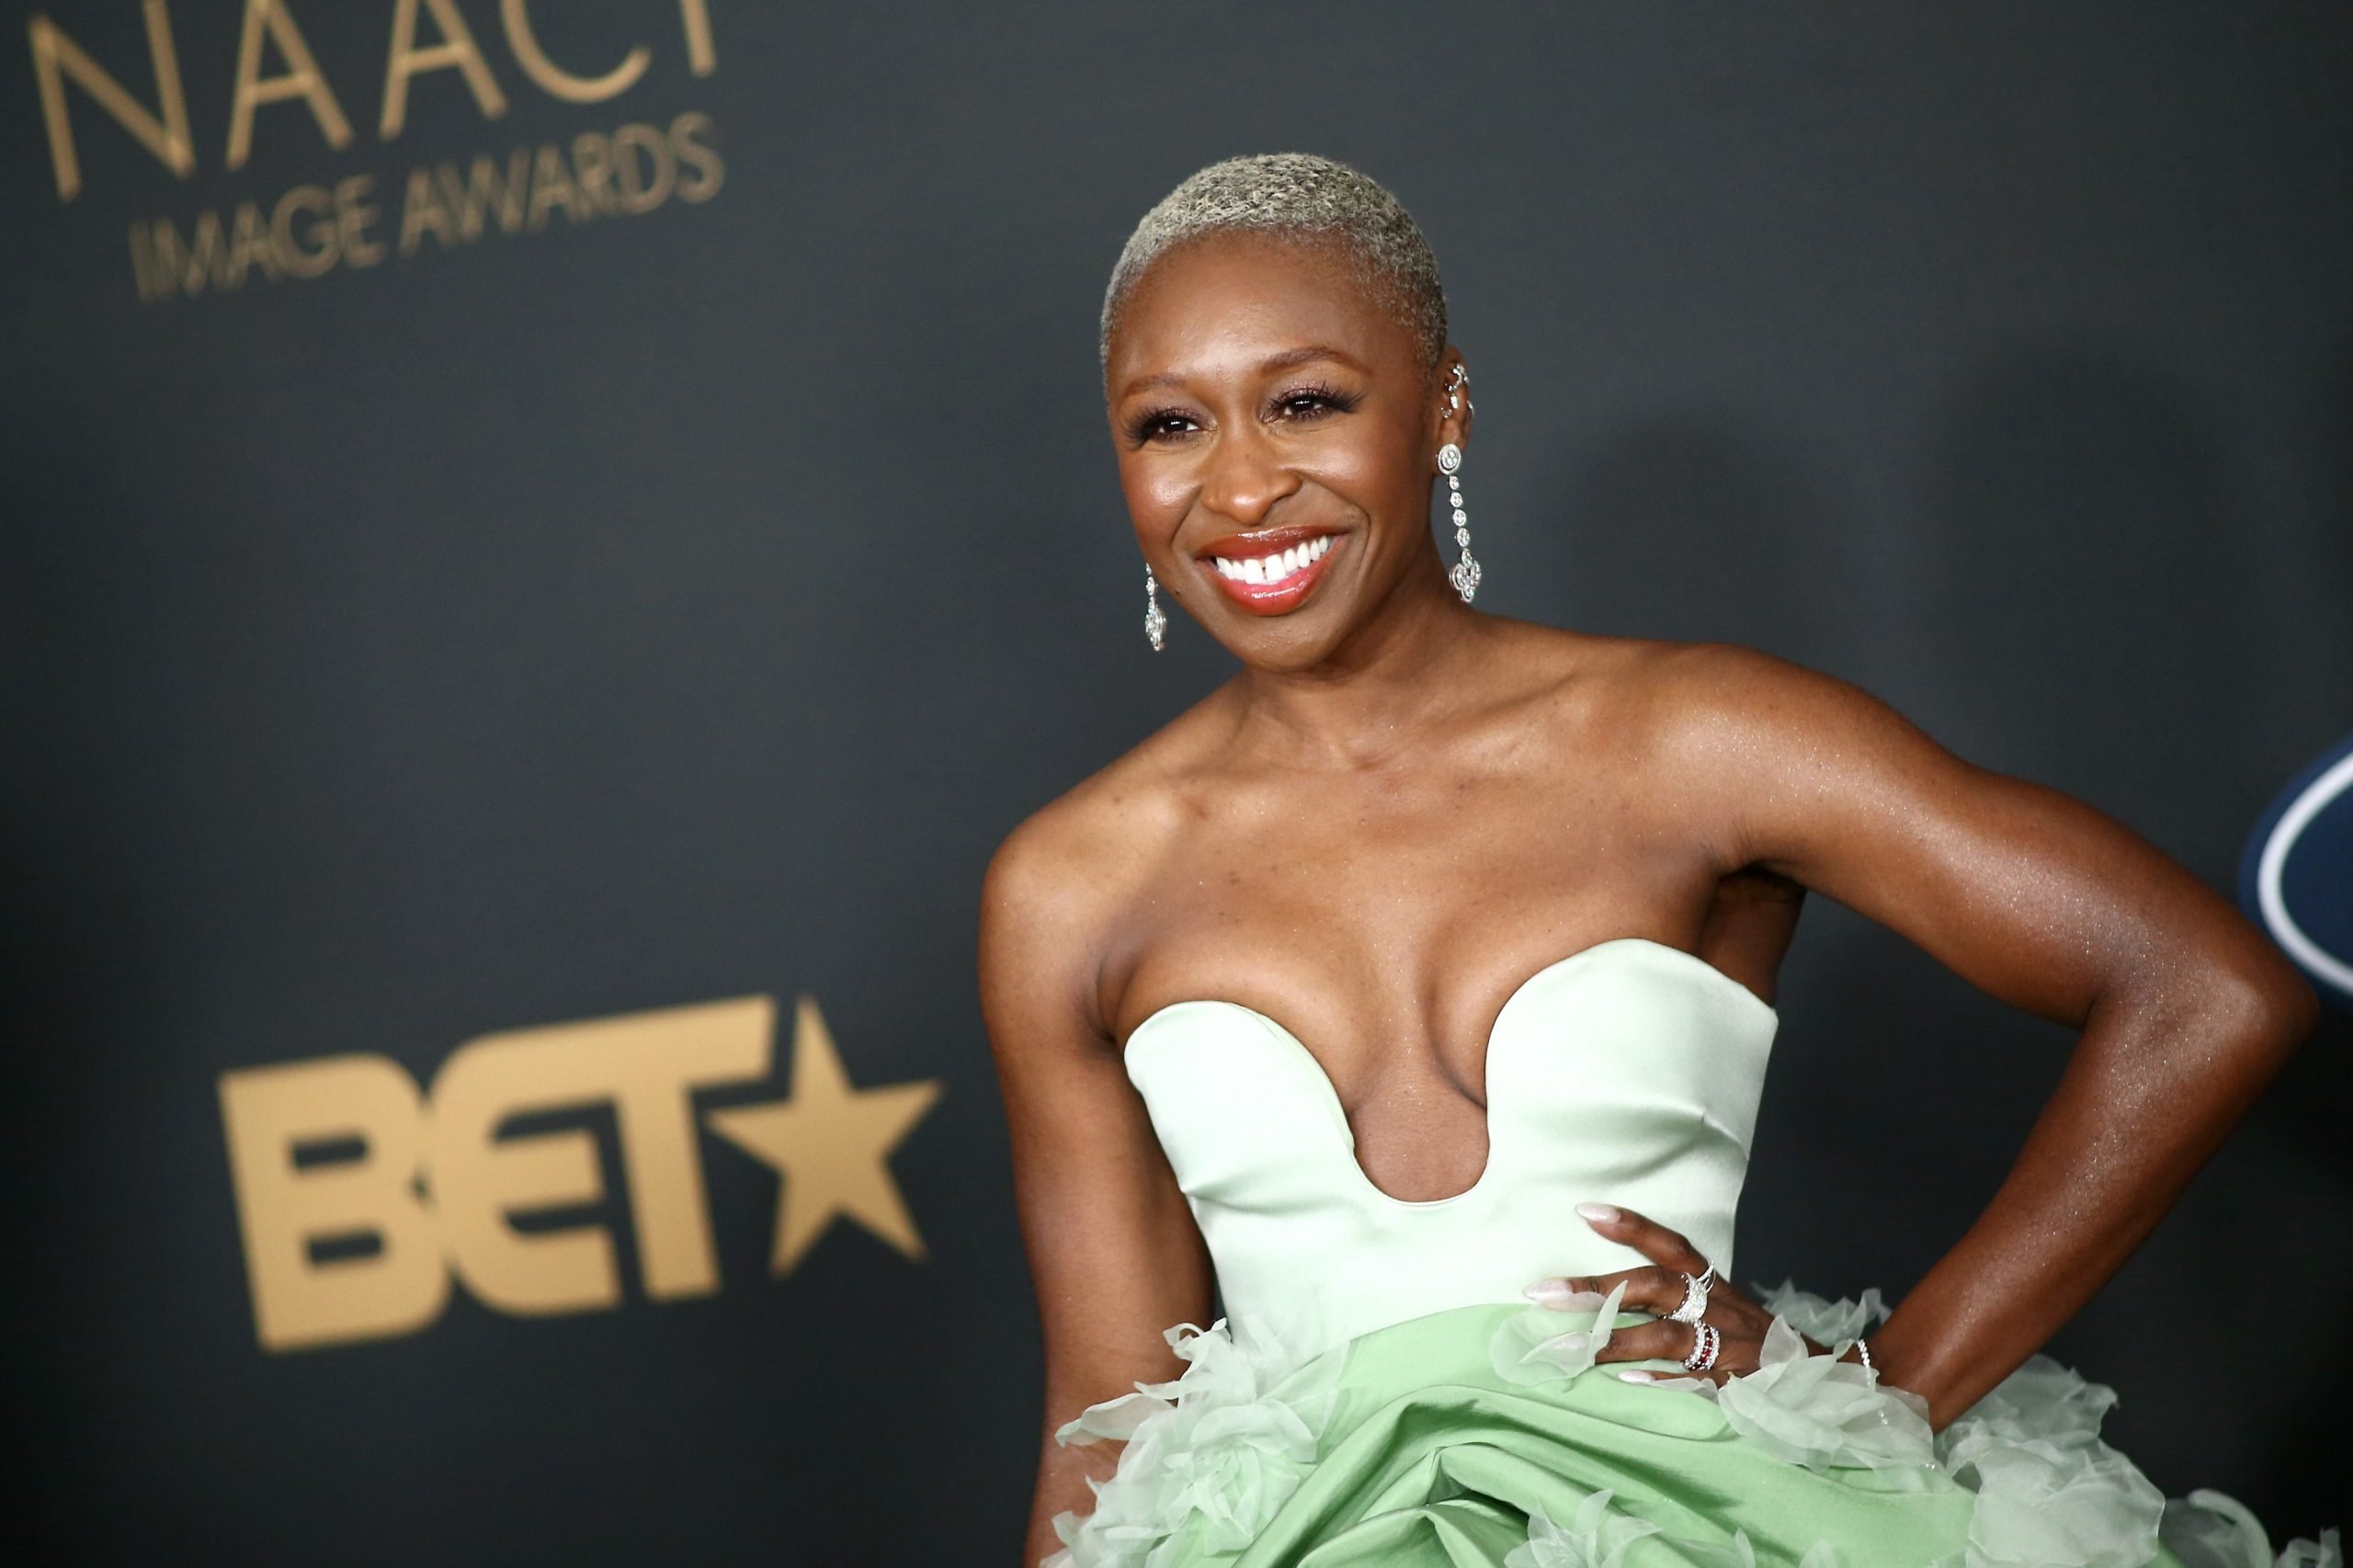 Cynthia Erivo and Andy Serkis Join Idris Elba in Netflix Movie ‘Luther’